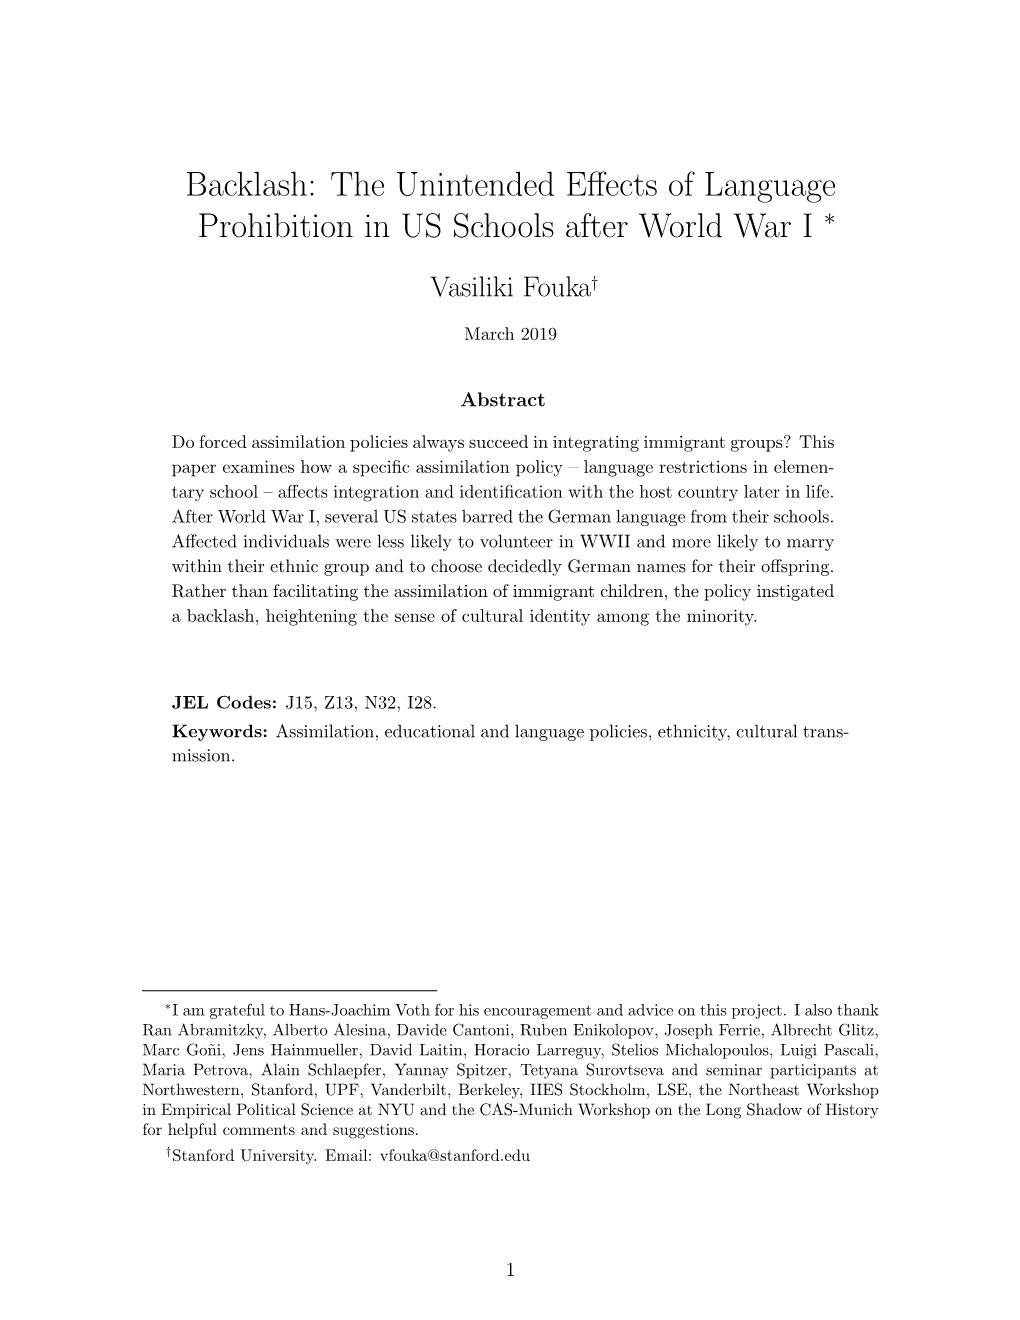 Backlash: the Unintended Effects of Language Prohibition in US